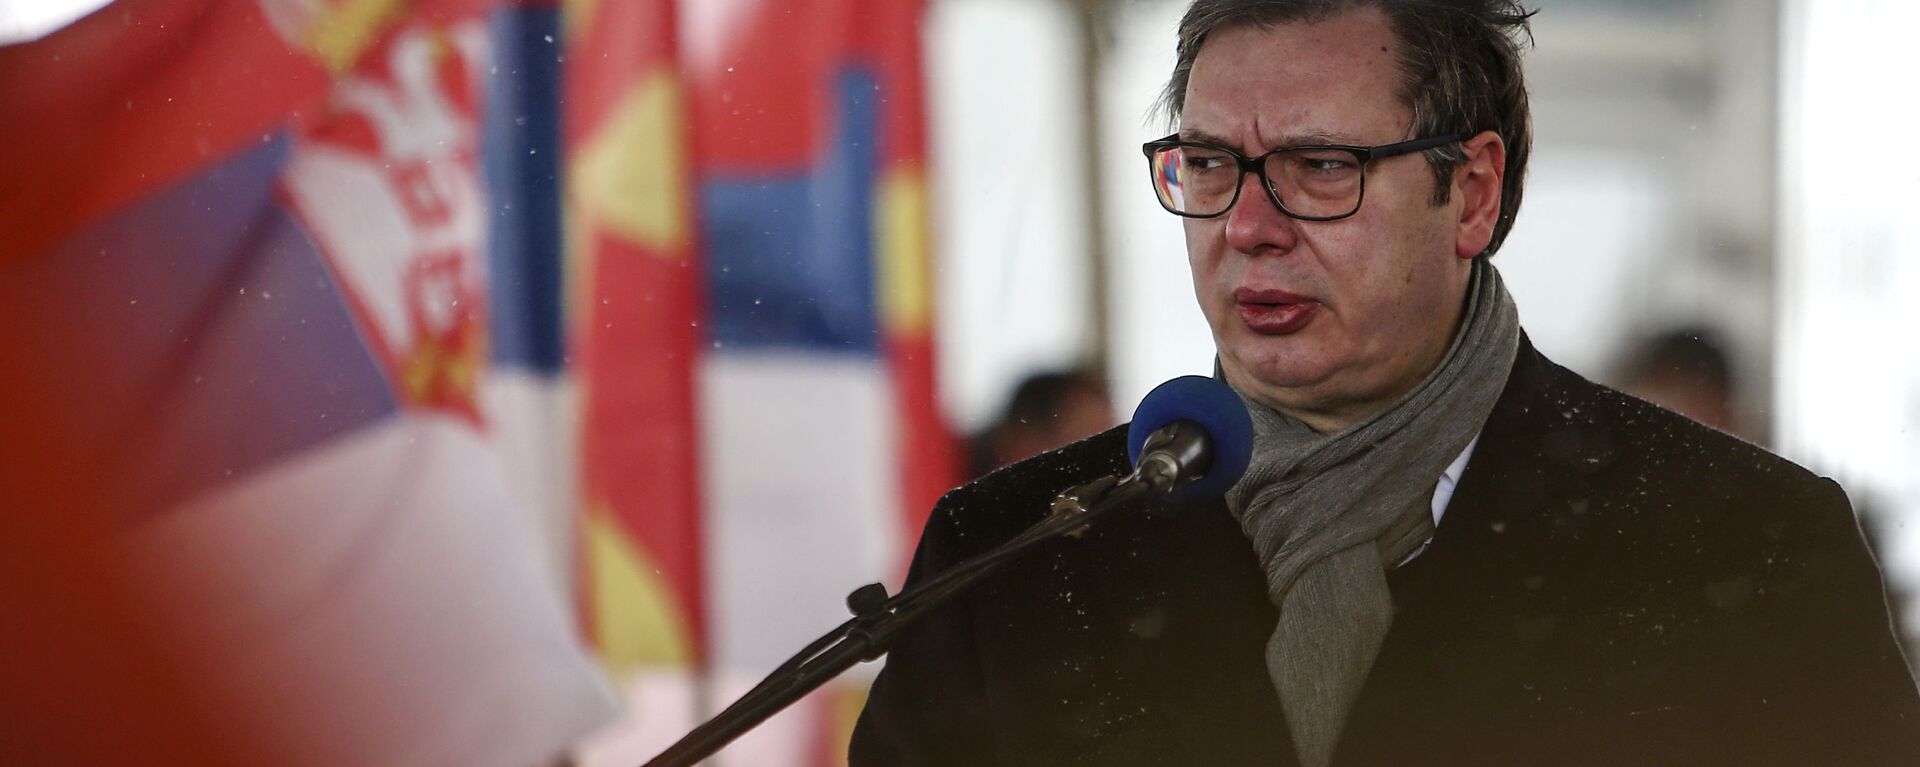 Serbia's President Aleksandar Vucic talks for the media at a news conference with North Macedonia's Prime Minister Zoran Zaev, not pictured, during a handover of COVID-19 vaccines, at the border crossing Tabanovce, between North Macedonia and Serbia, on Sunday, Feb. 14, 2021. - Sputnik International, 1920, 23.11.2021